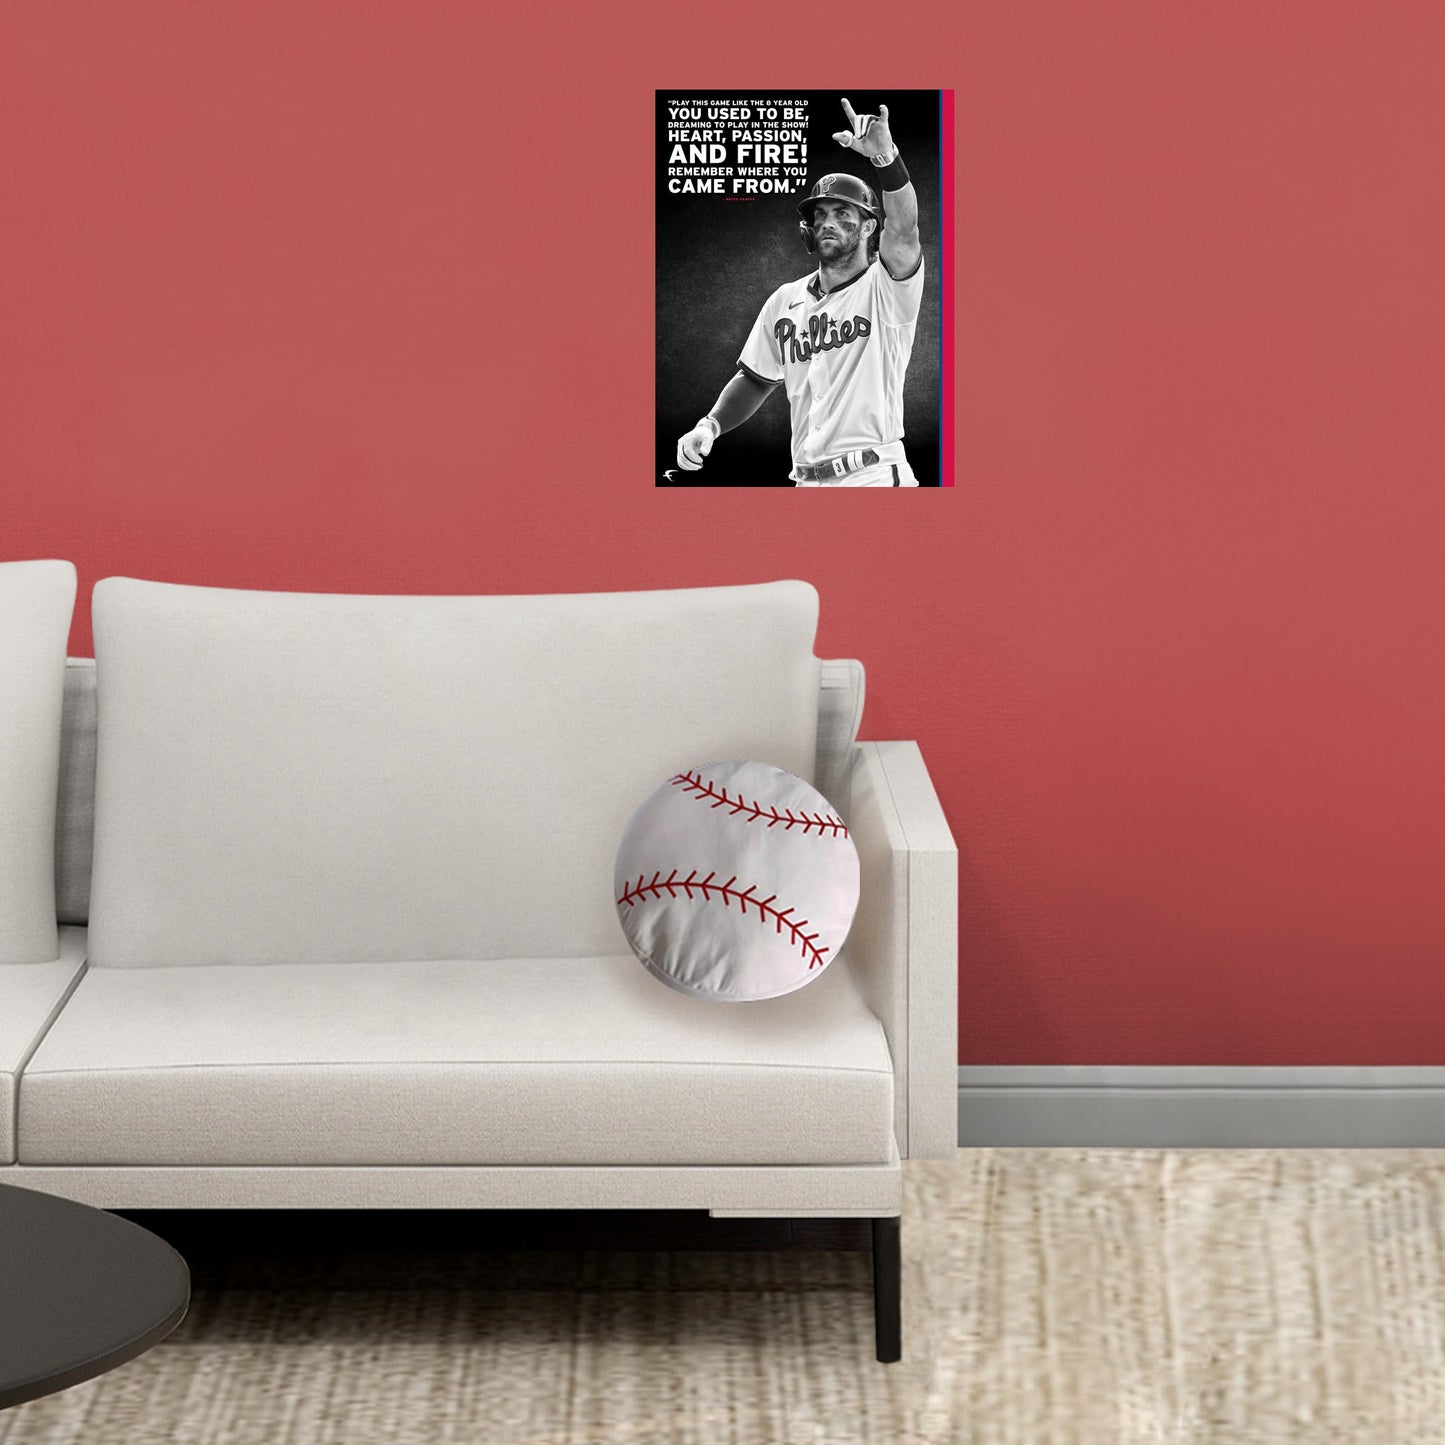 Philadelphia Phillies: Bryce Harper Inspirational Poster - Officially Licensed MLB Removable Adhesive Decal